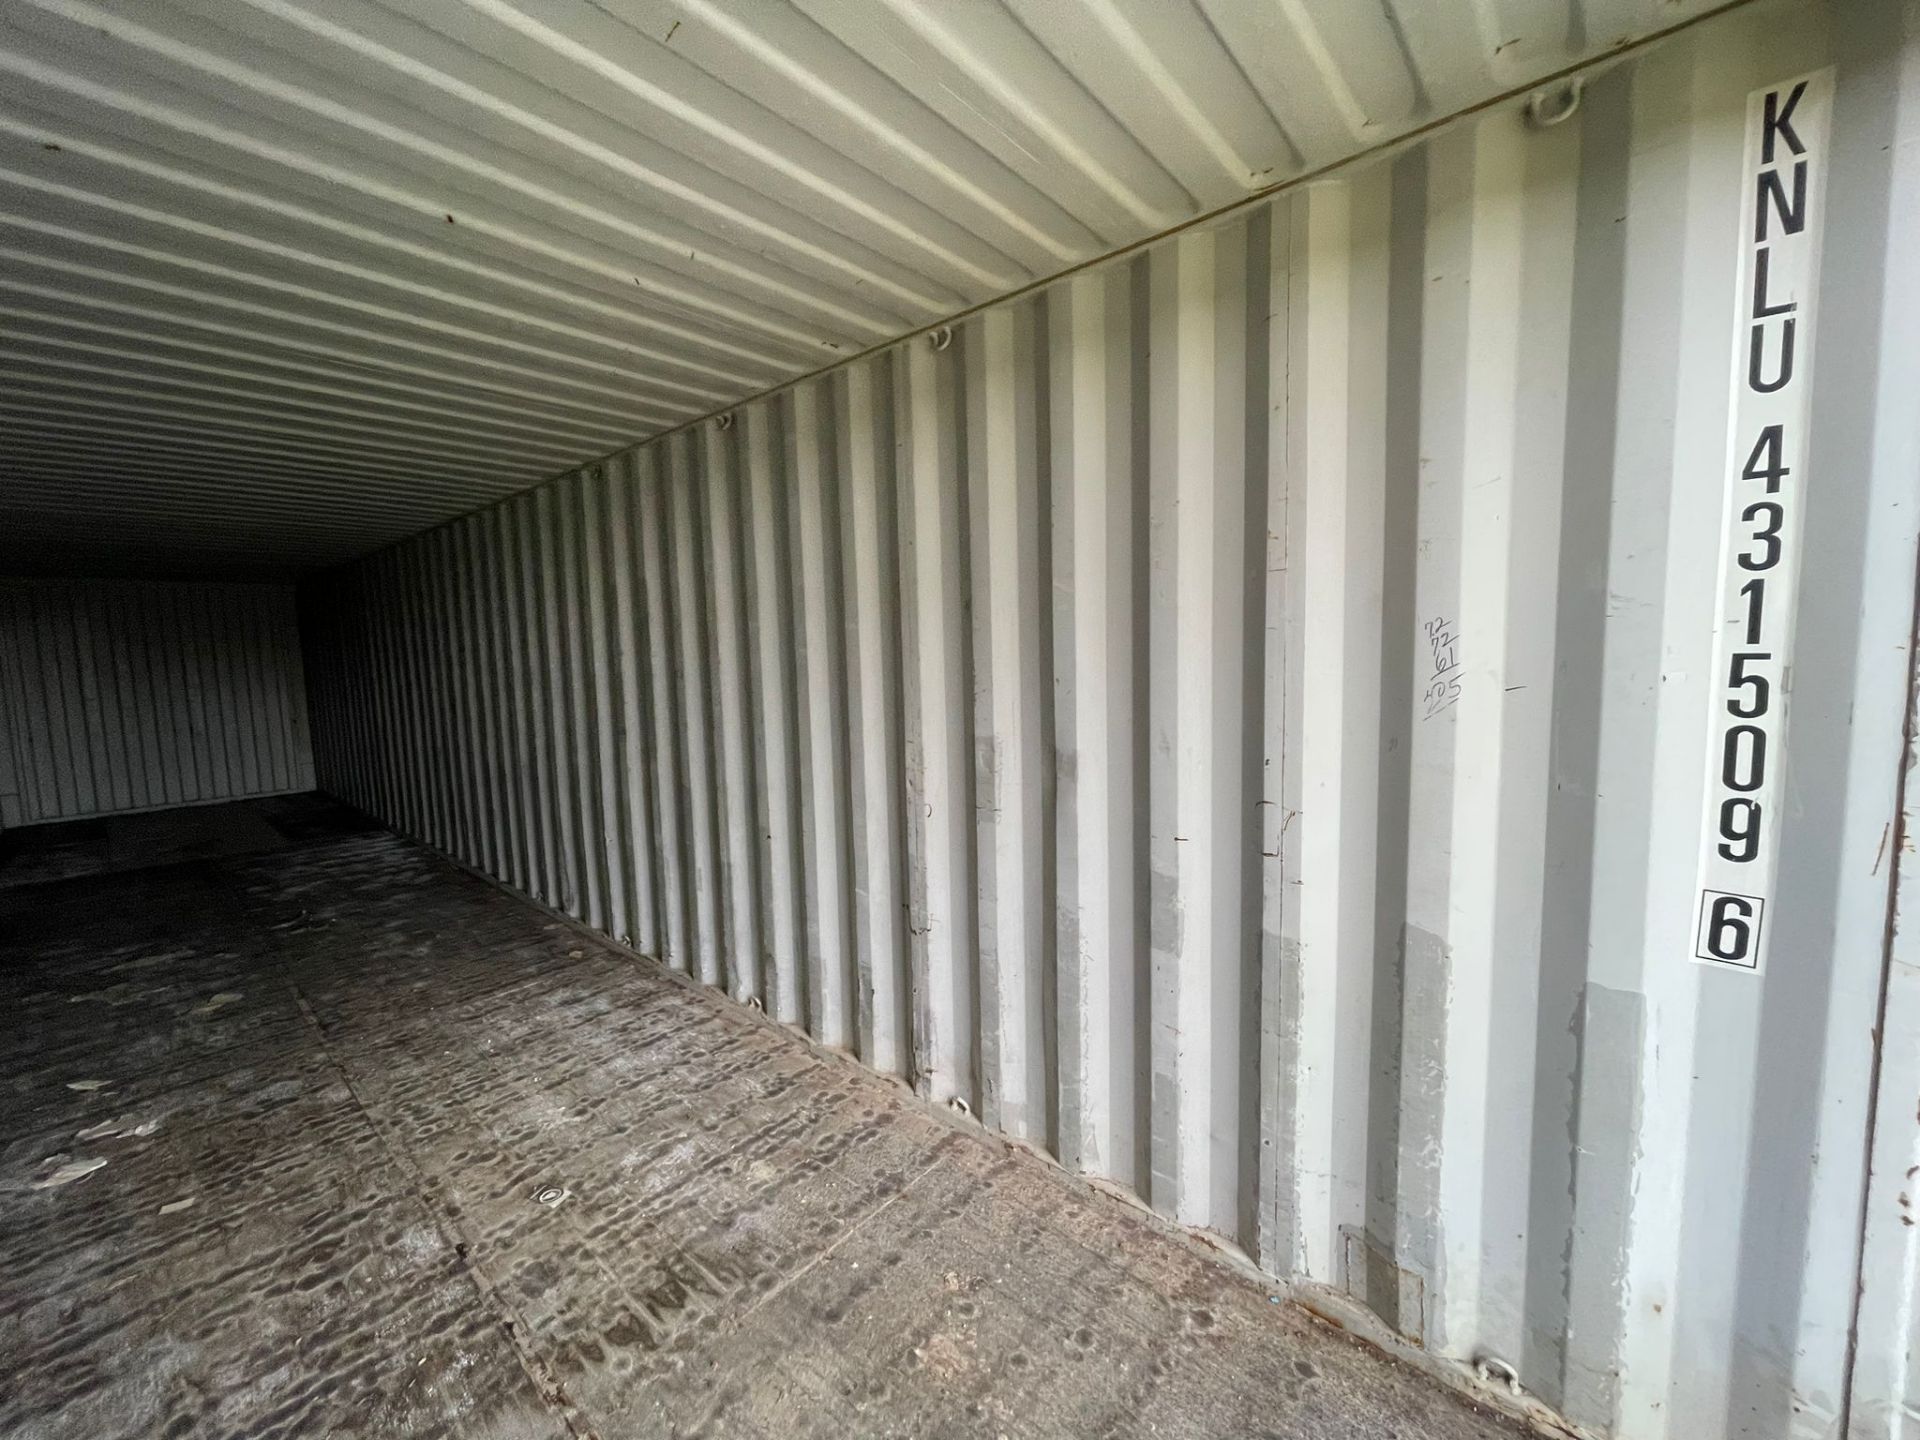 Shipping Container - ref KNLU4315096 - NO RESERVE (40’ GP - Standard) - Image 2 of 3